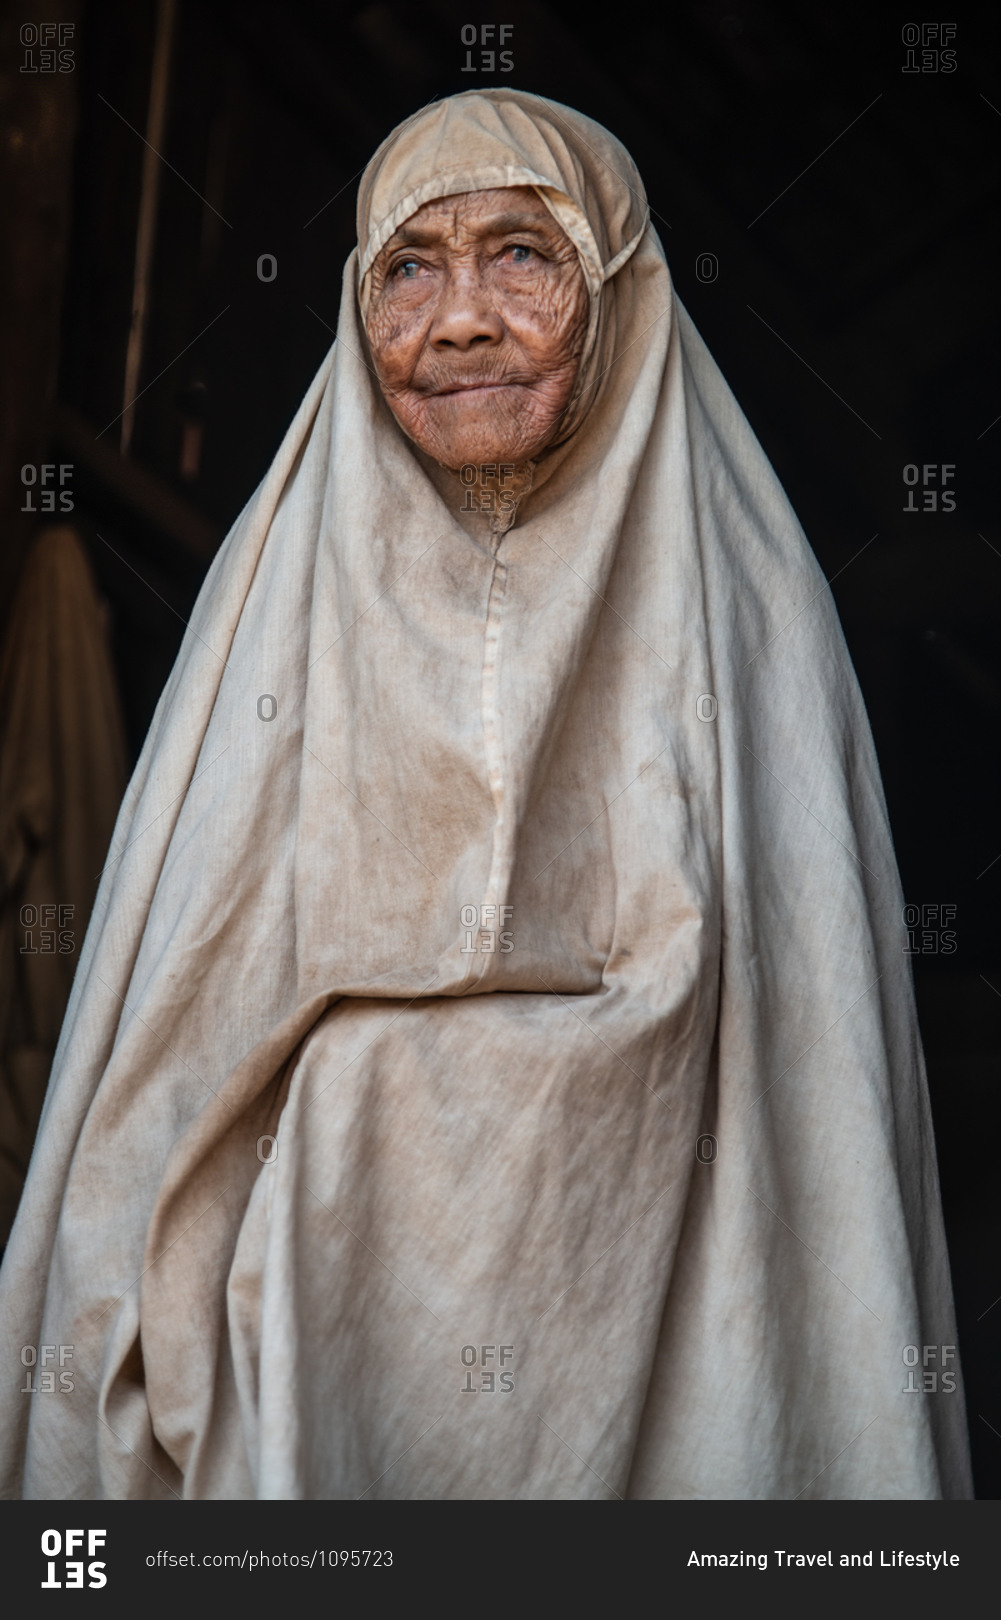 Portrait, Kratie Province, Cambodia - 26 February 2013:
Muslim Woman Adorns A Full Hijab Style Gown In A Minority Village
Of Ethnic Cham People. stock photo - OFFSET